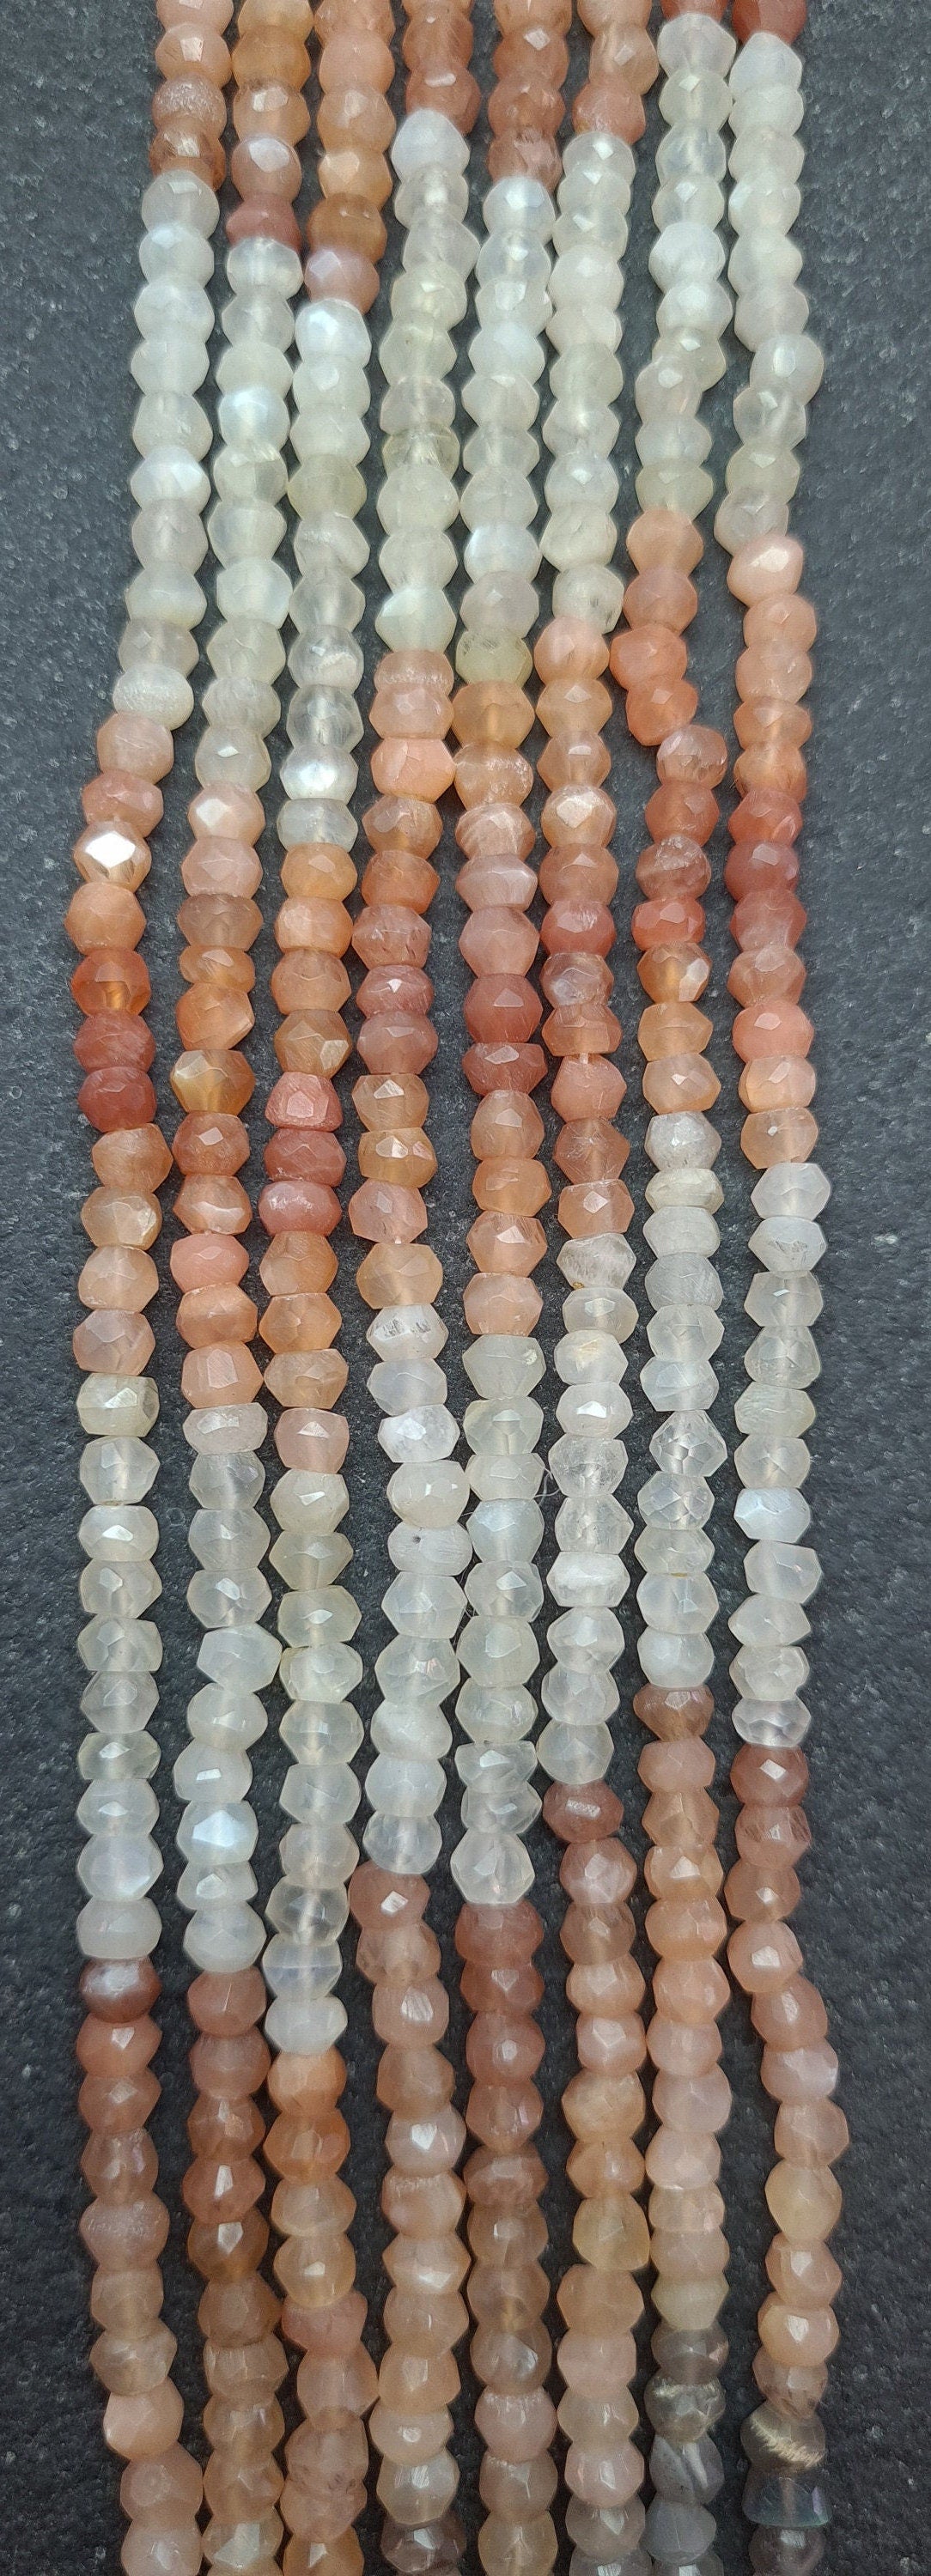 Moonstone Gemstone Beads. Natural Mix Rondelle Faceted Moonstone Gemstone with strand length 13" size 5mm